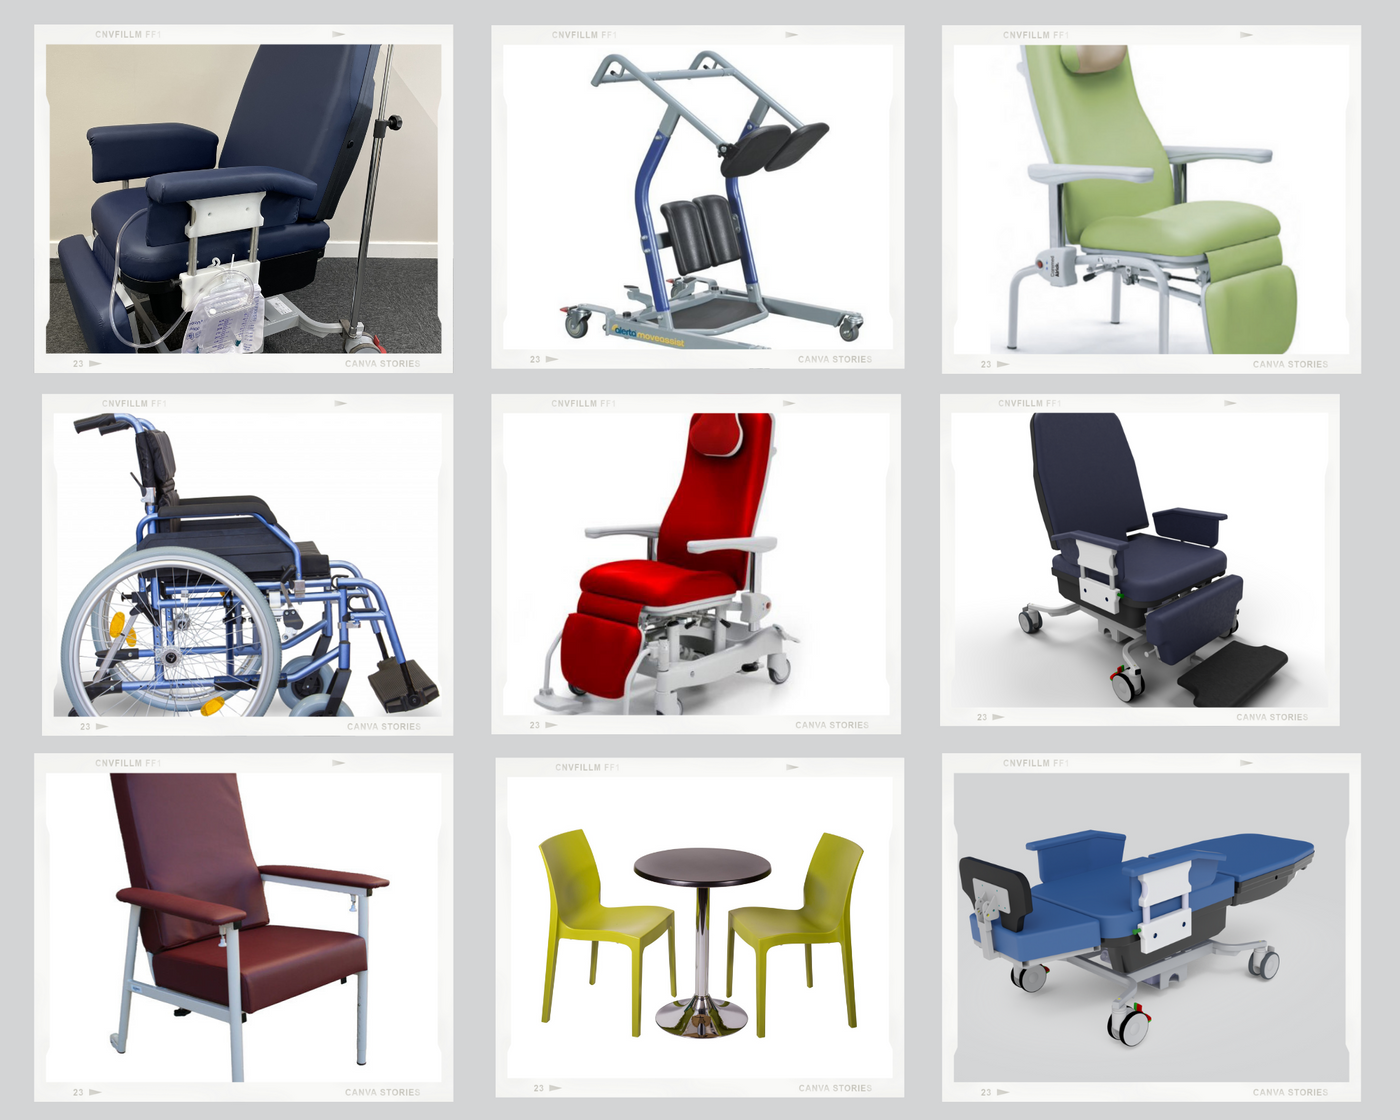 Images of the range of Caremed hospital chairs we offer